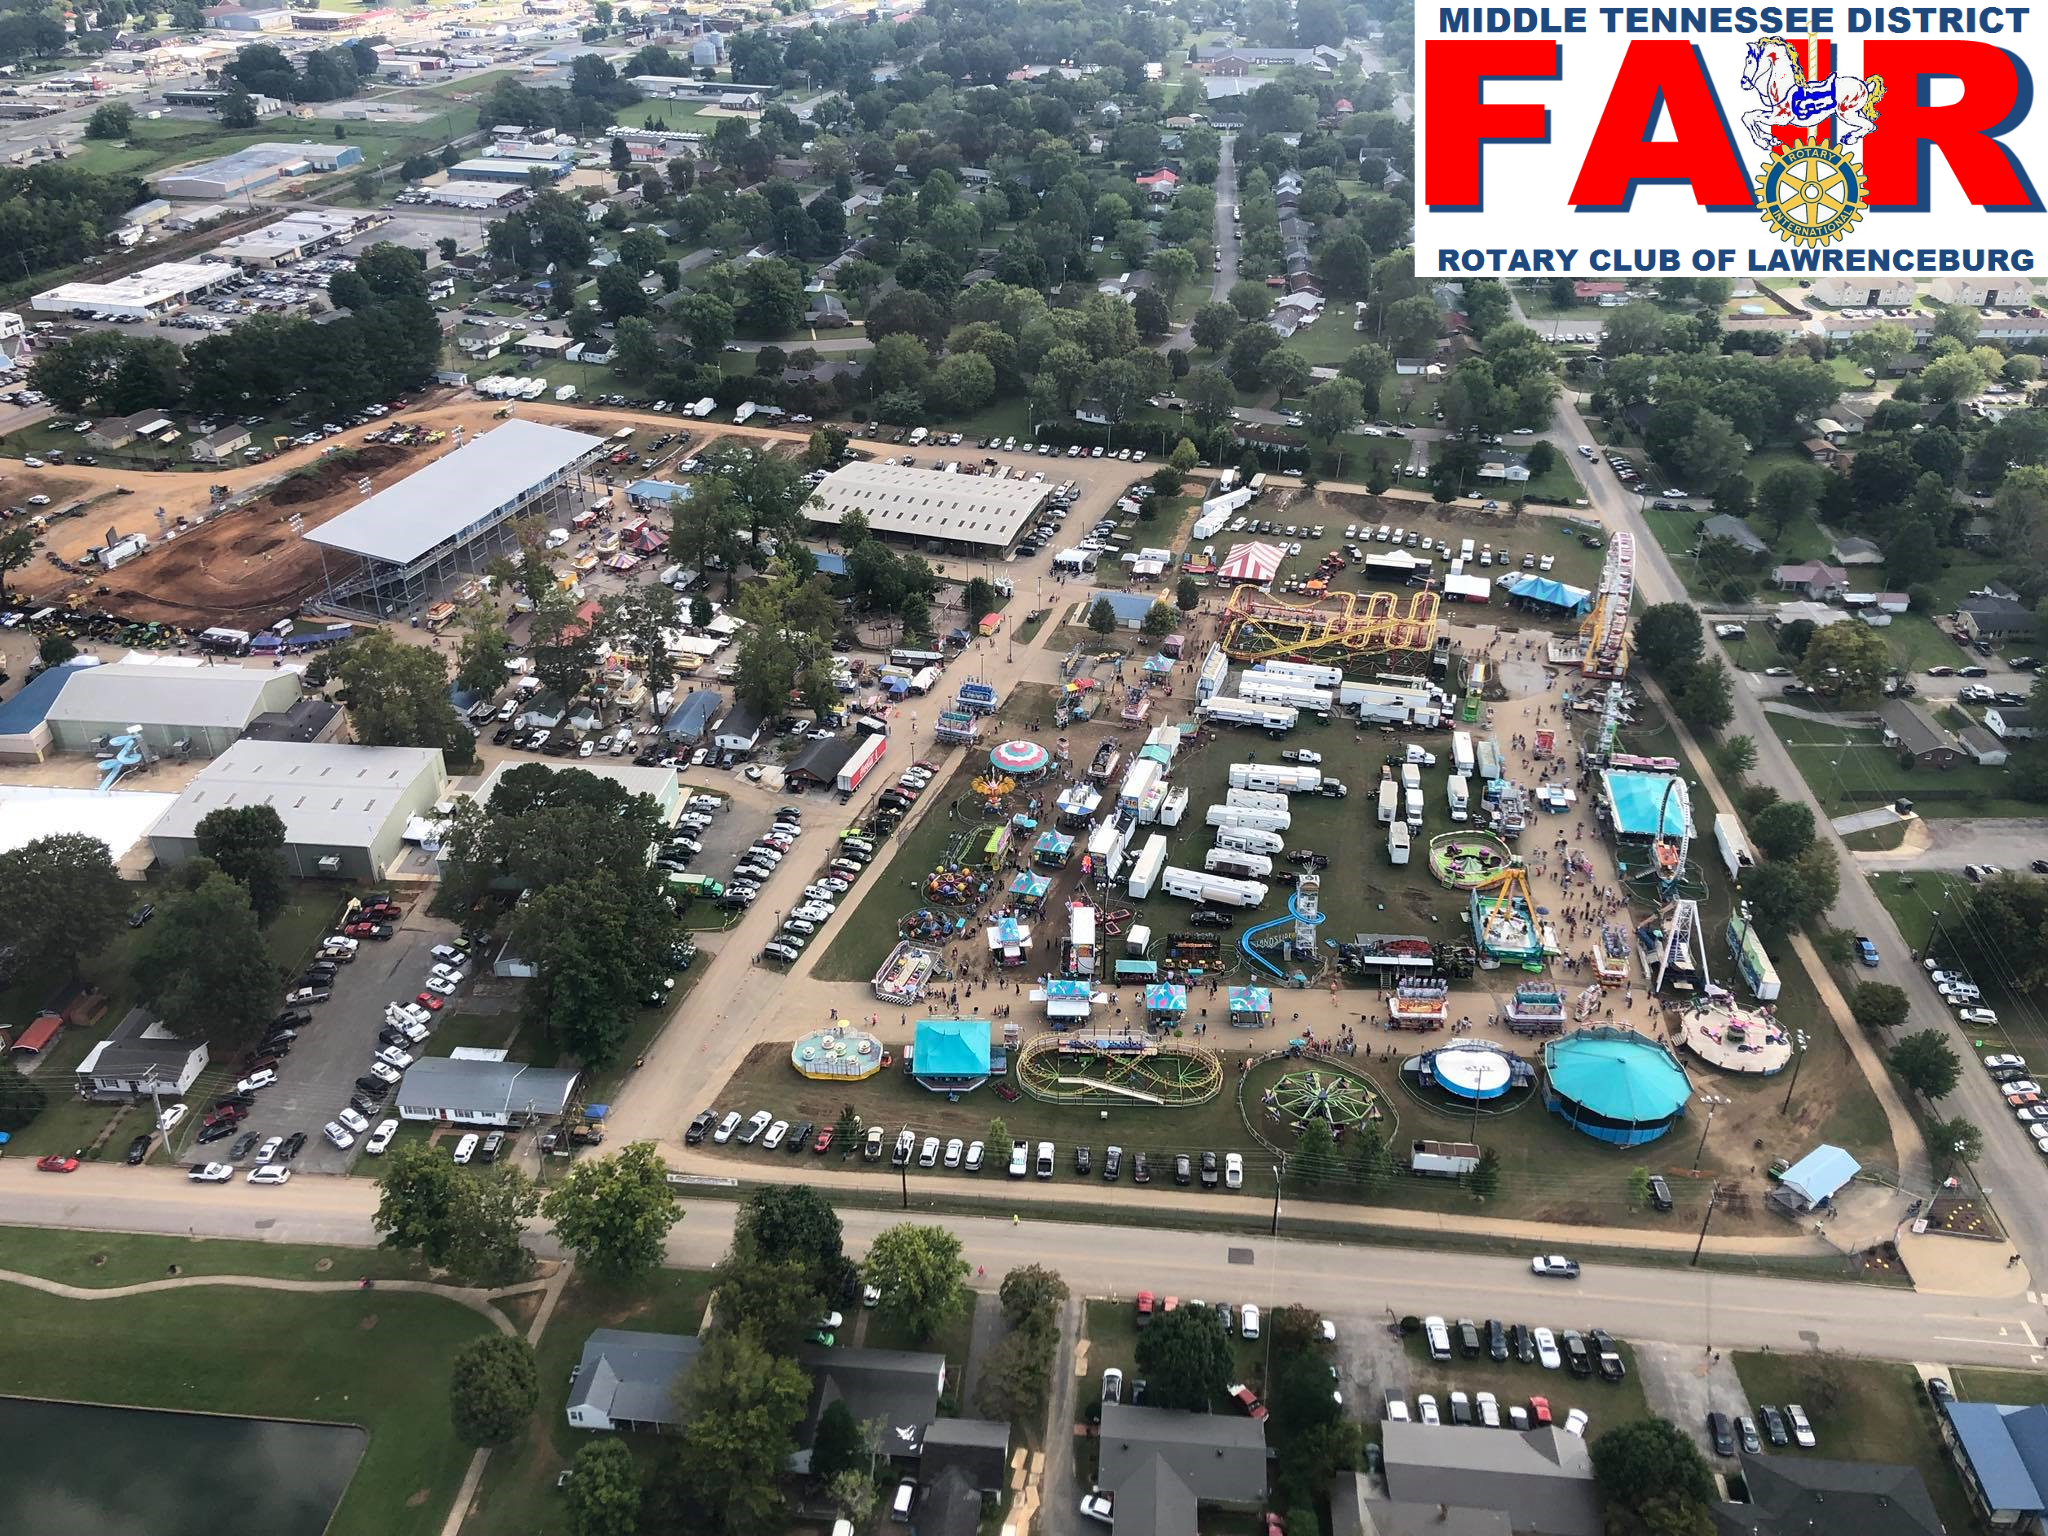 Middle Tennessee District Fair sponsored by Lawrenceburg Rotary